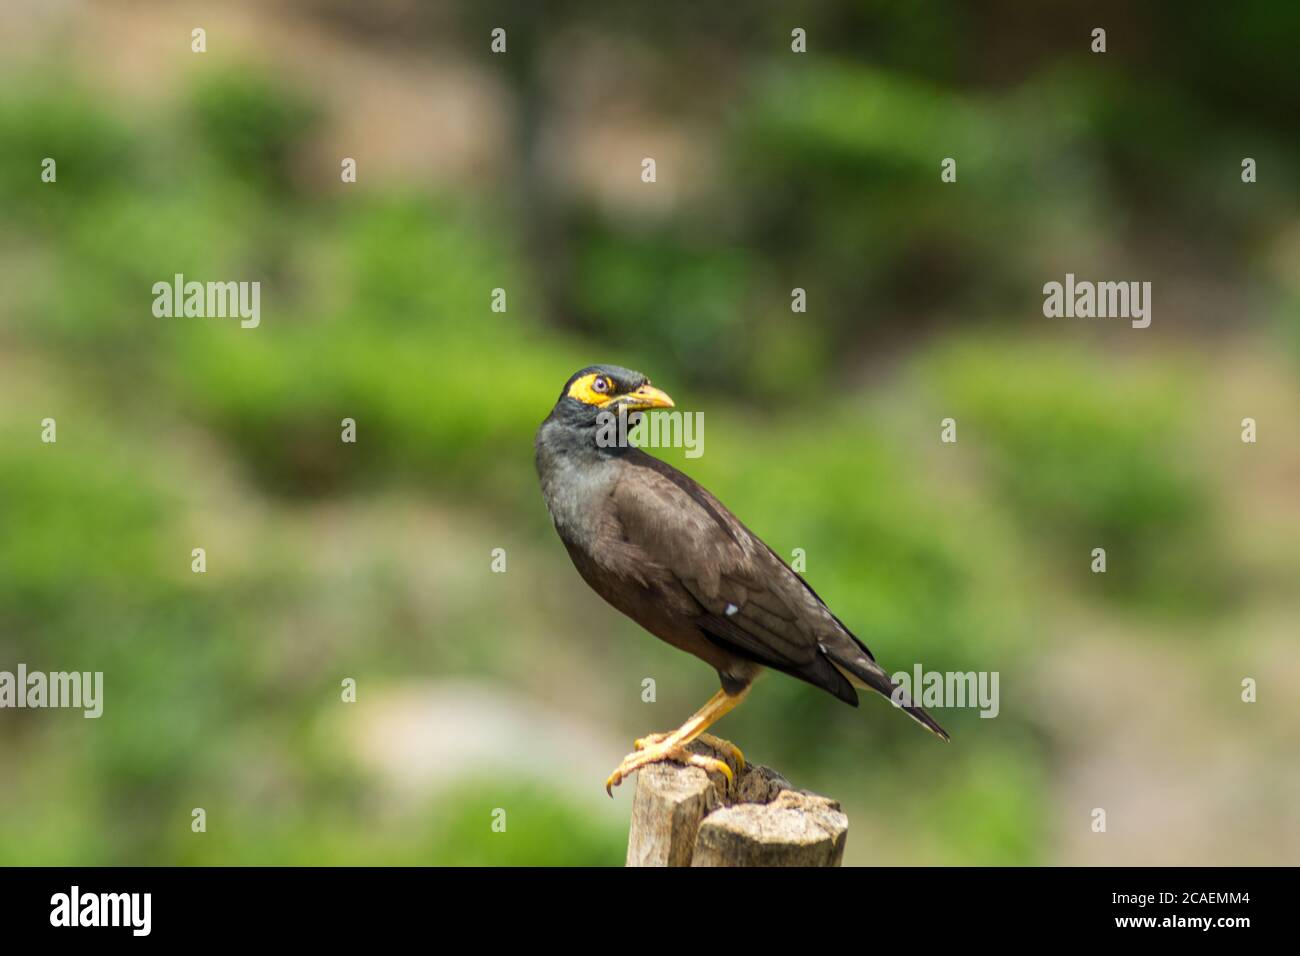 black bird with a yellow beak standing on a fence. blurred background Stock Photo